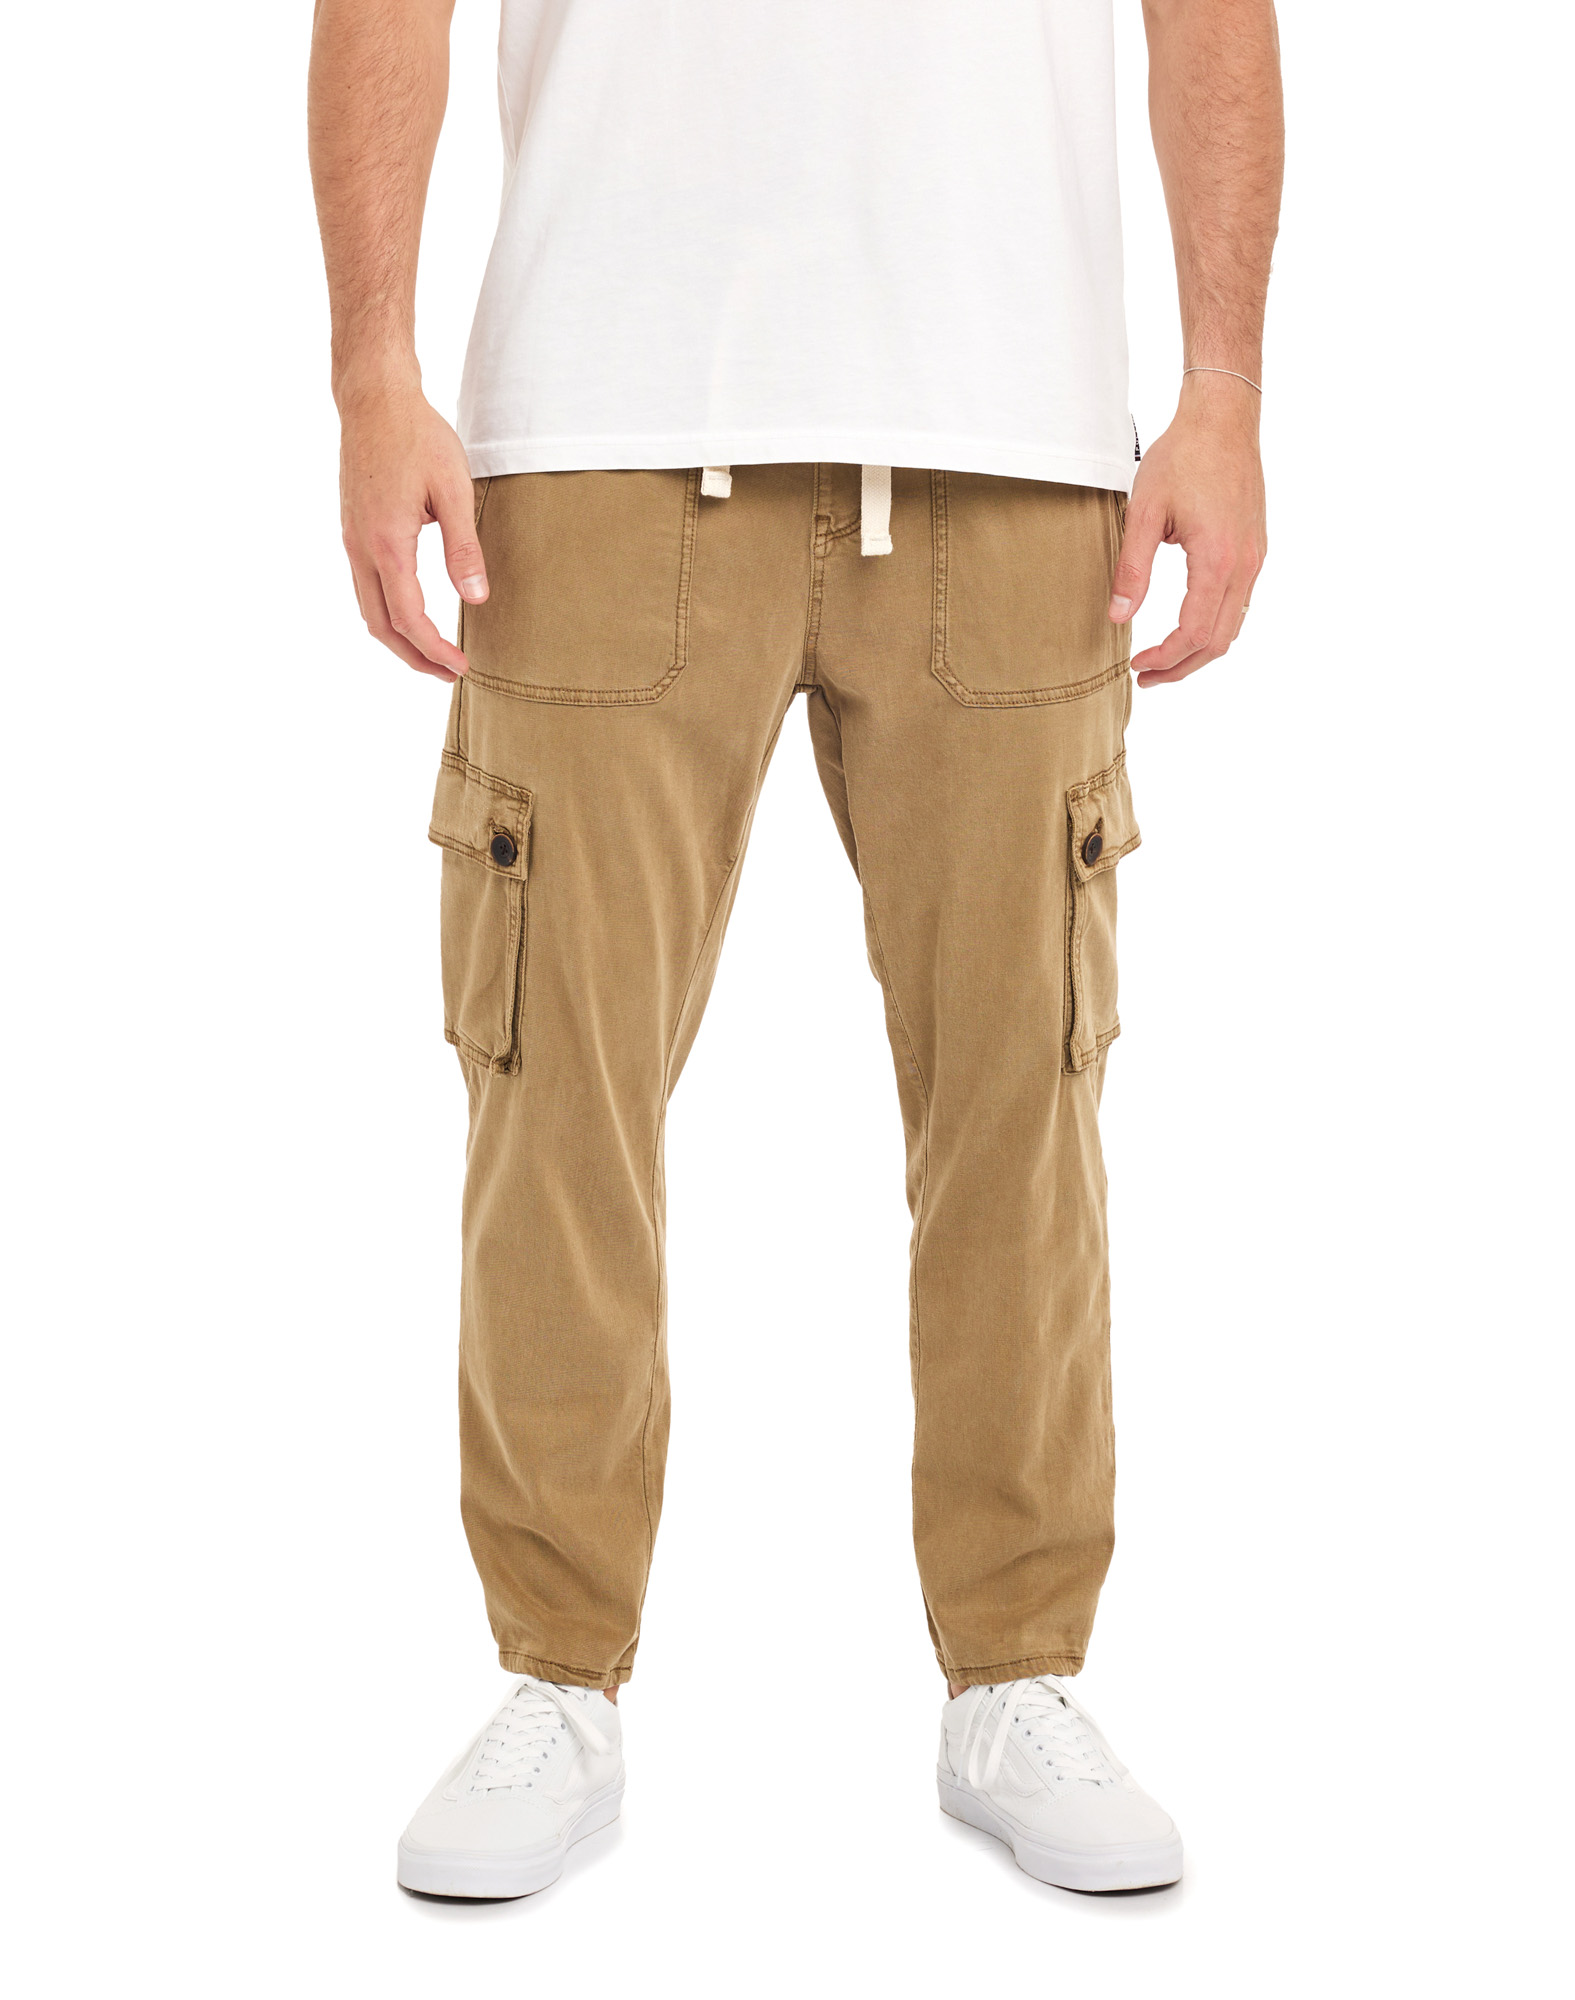 Beach Pants With Pockets